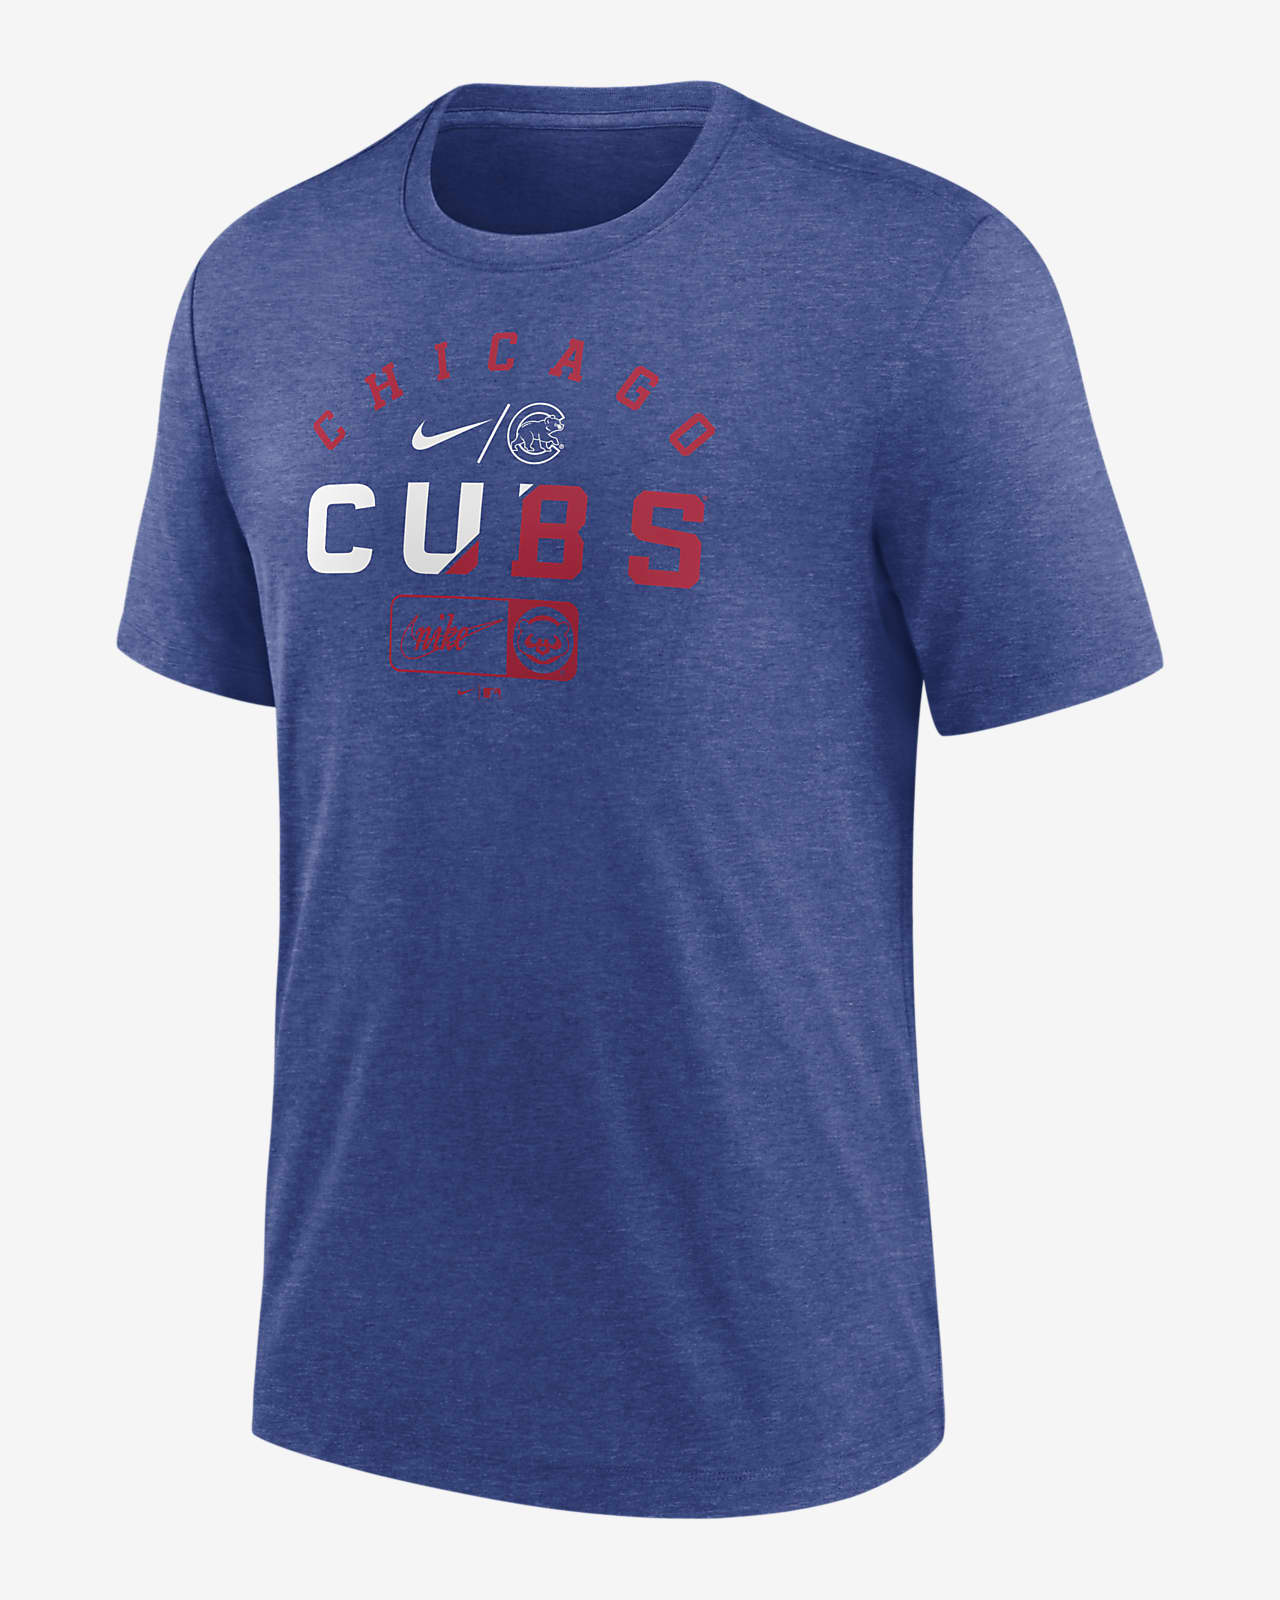 Chicago Cubs Nike Dri Fit Clothing, Cubs Dri Fit Polos, Hats, Cubs